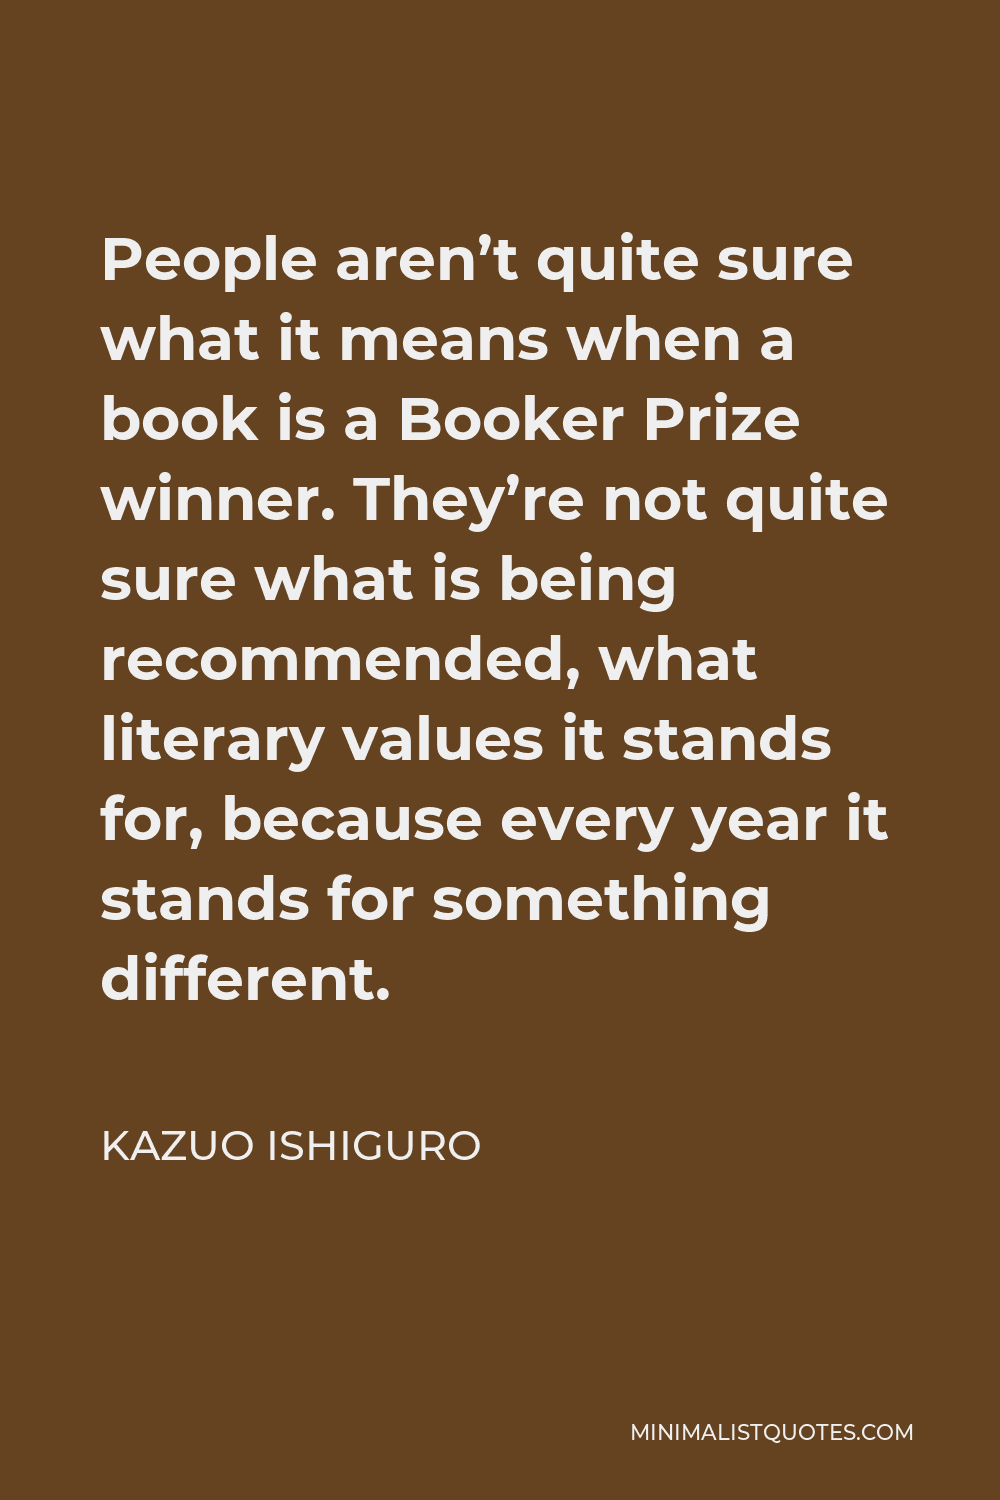 Kazuo Ishiguro Quote - People aren’t quite sure what it means when a book is a Booker Prize winner. They’re not quite sure what is being recommended, what literary values it stands for, because every year it stands for something different.